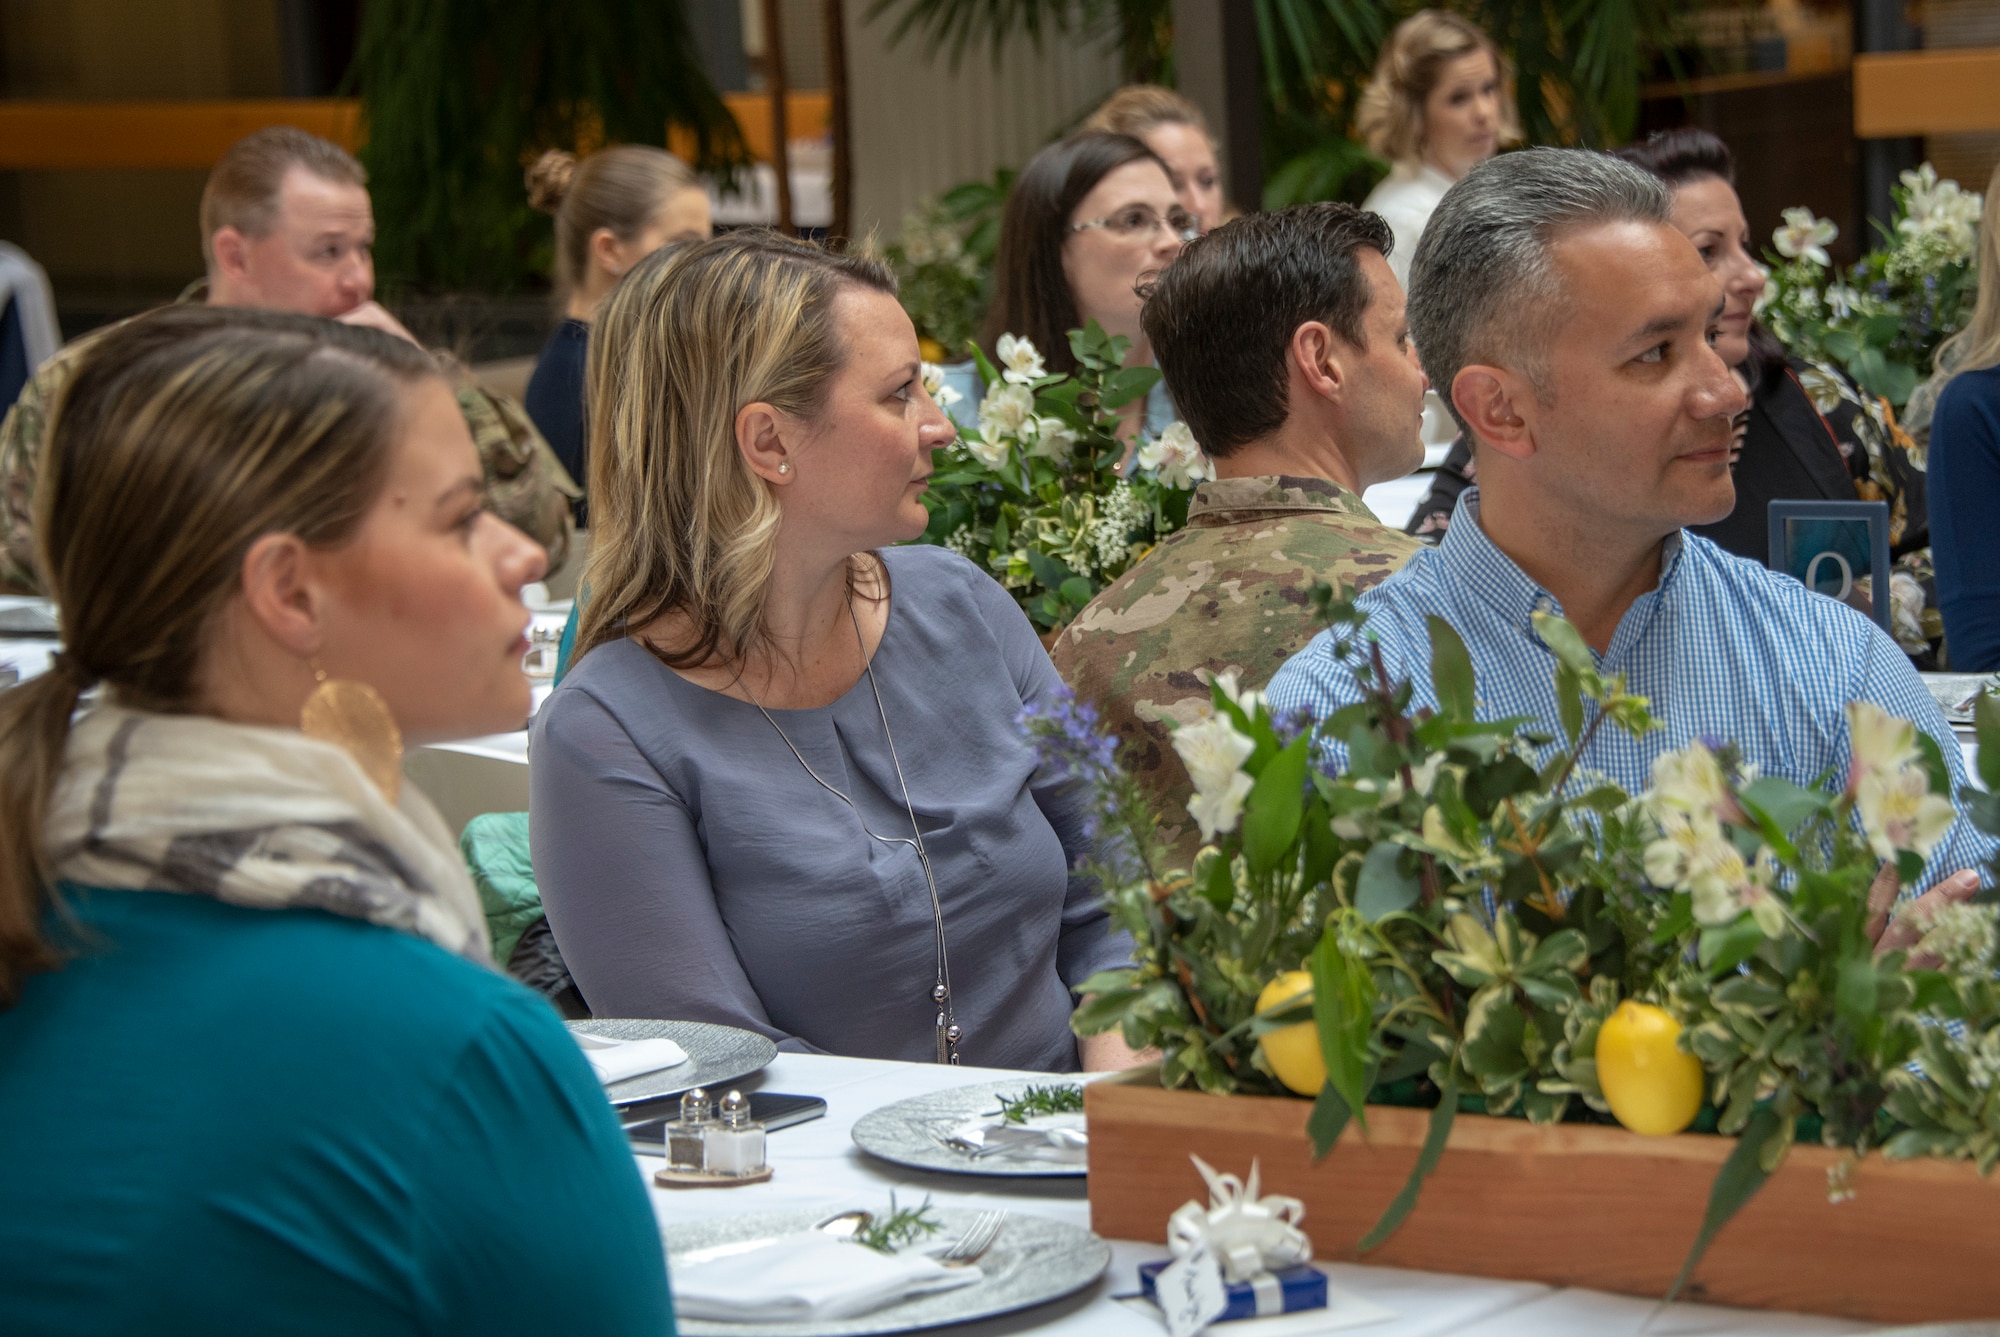 Audience members listen to remarks given at the Key Spouse Recognition event at the 60th Maintenance Group atrium, Feb. 8, 2019 at Travis Air Force Base, California. The Key Spouse Program is an Air Force-wide volunteer program that builds and fosters support for military families through outreach education events and providing families a link to leadership.(U.S. Air Force photo by Heide Couch)